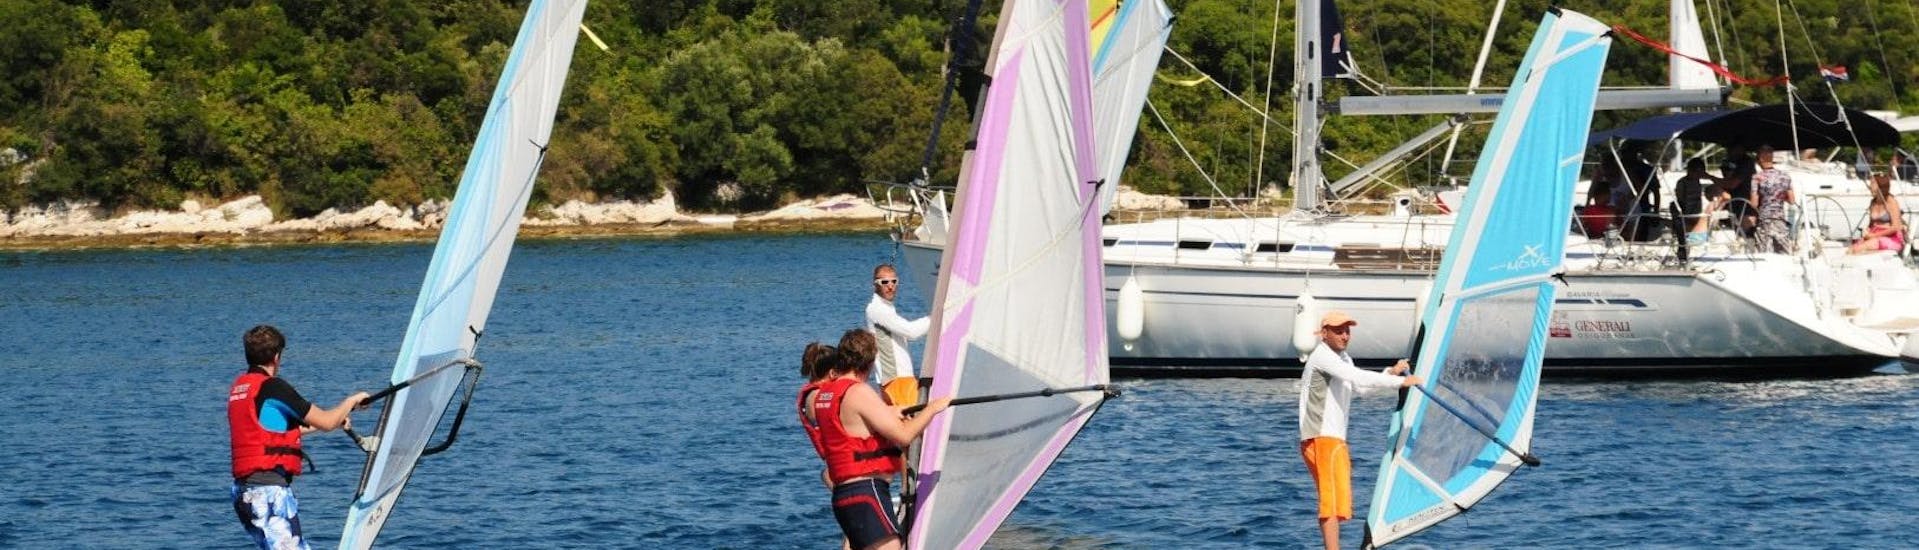 Windsurfing "Basic Course" for Kids & Adults - Beginner.